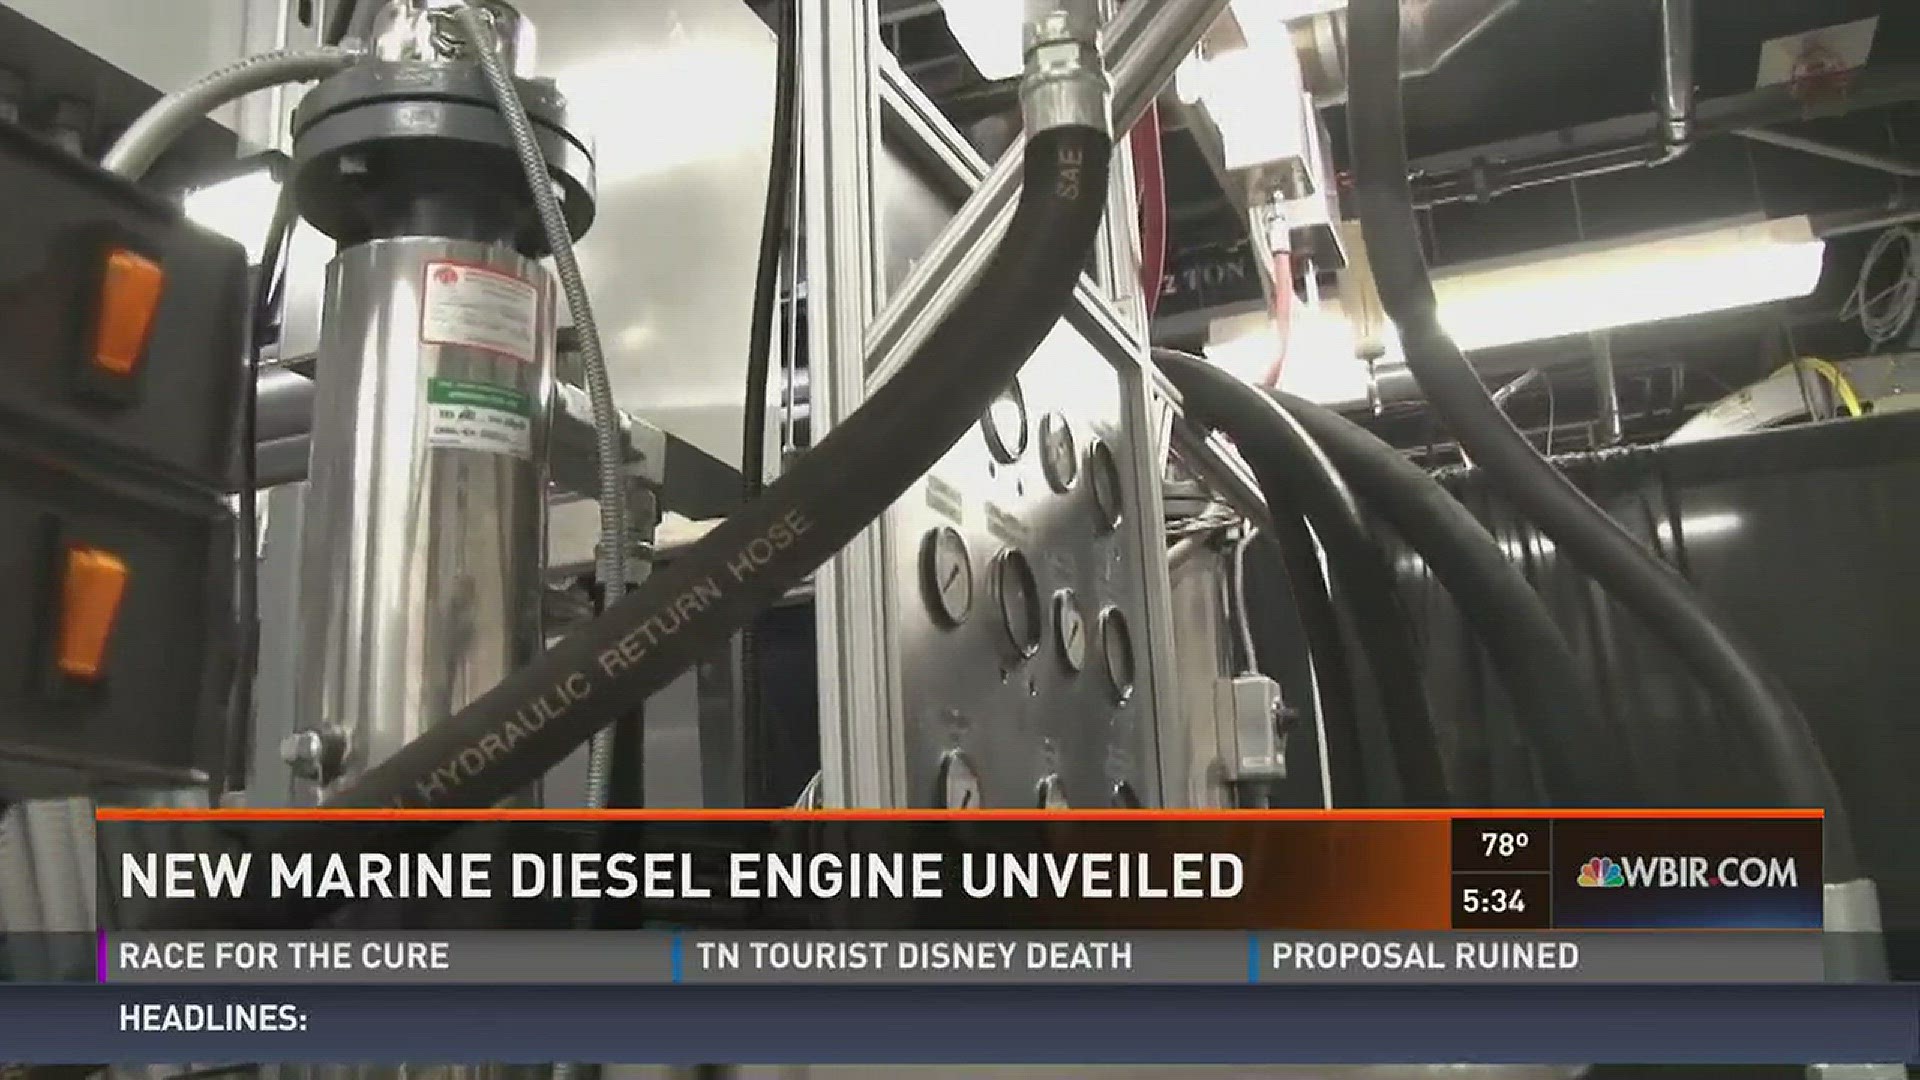 Exxon Mobil and Oak Ridge National Laboratory have teamed up to create a new marine Diesel Engine.